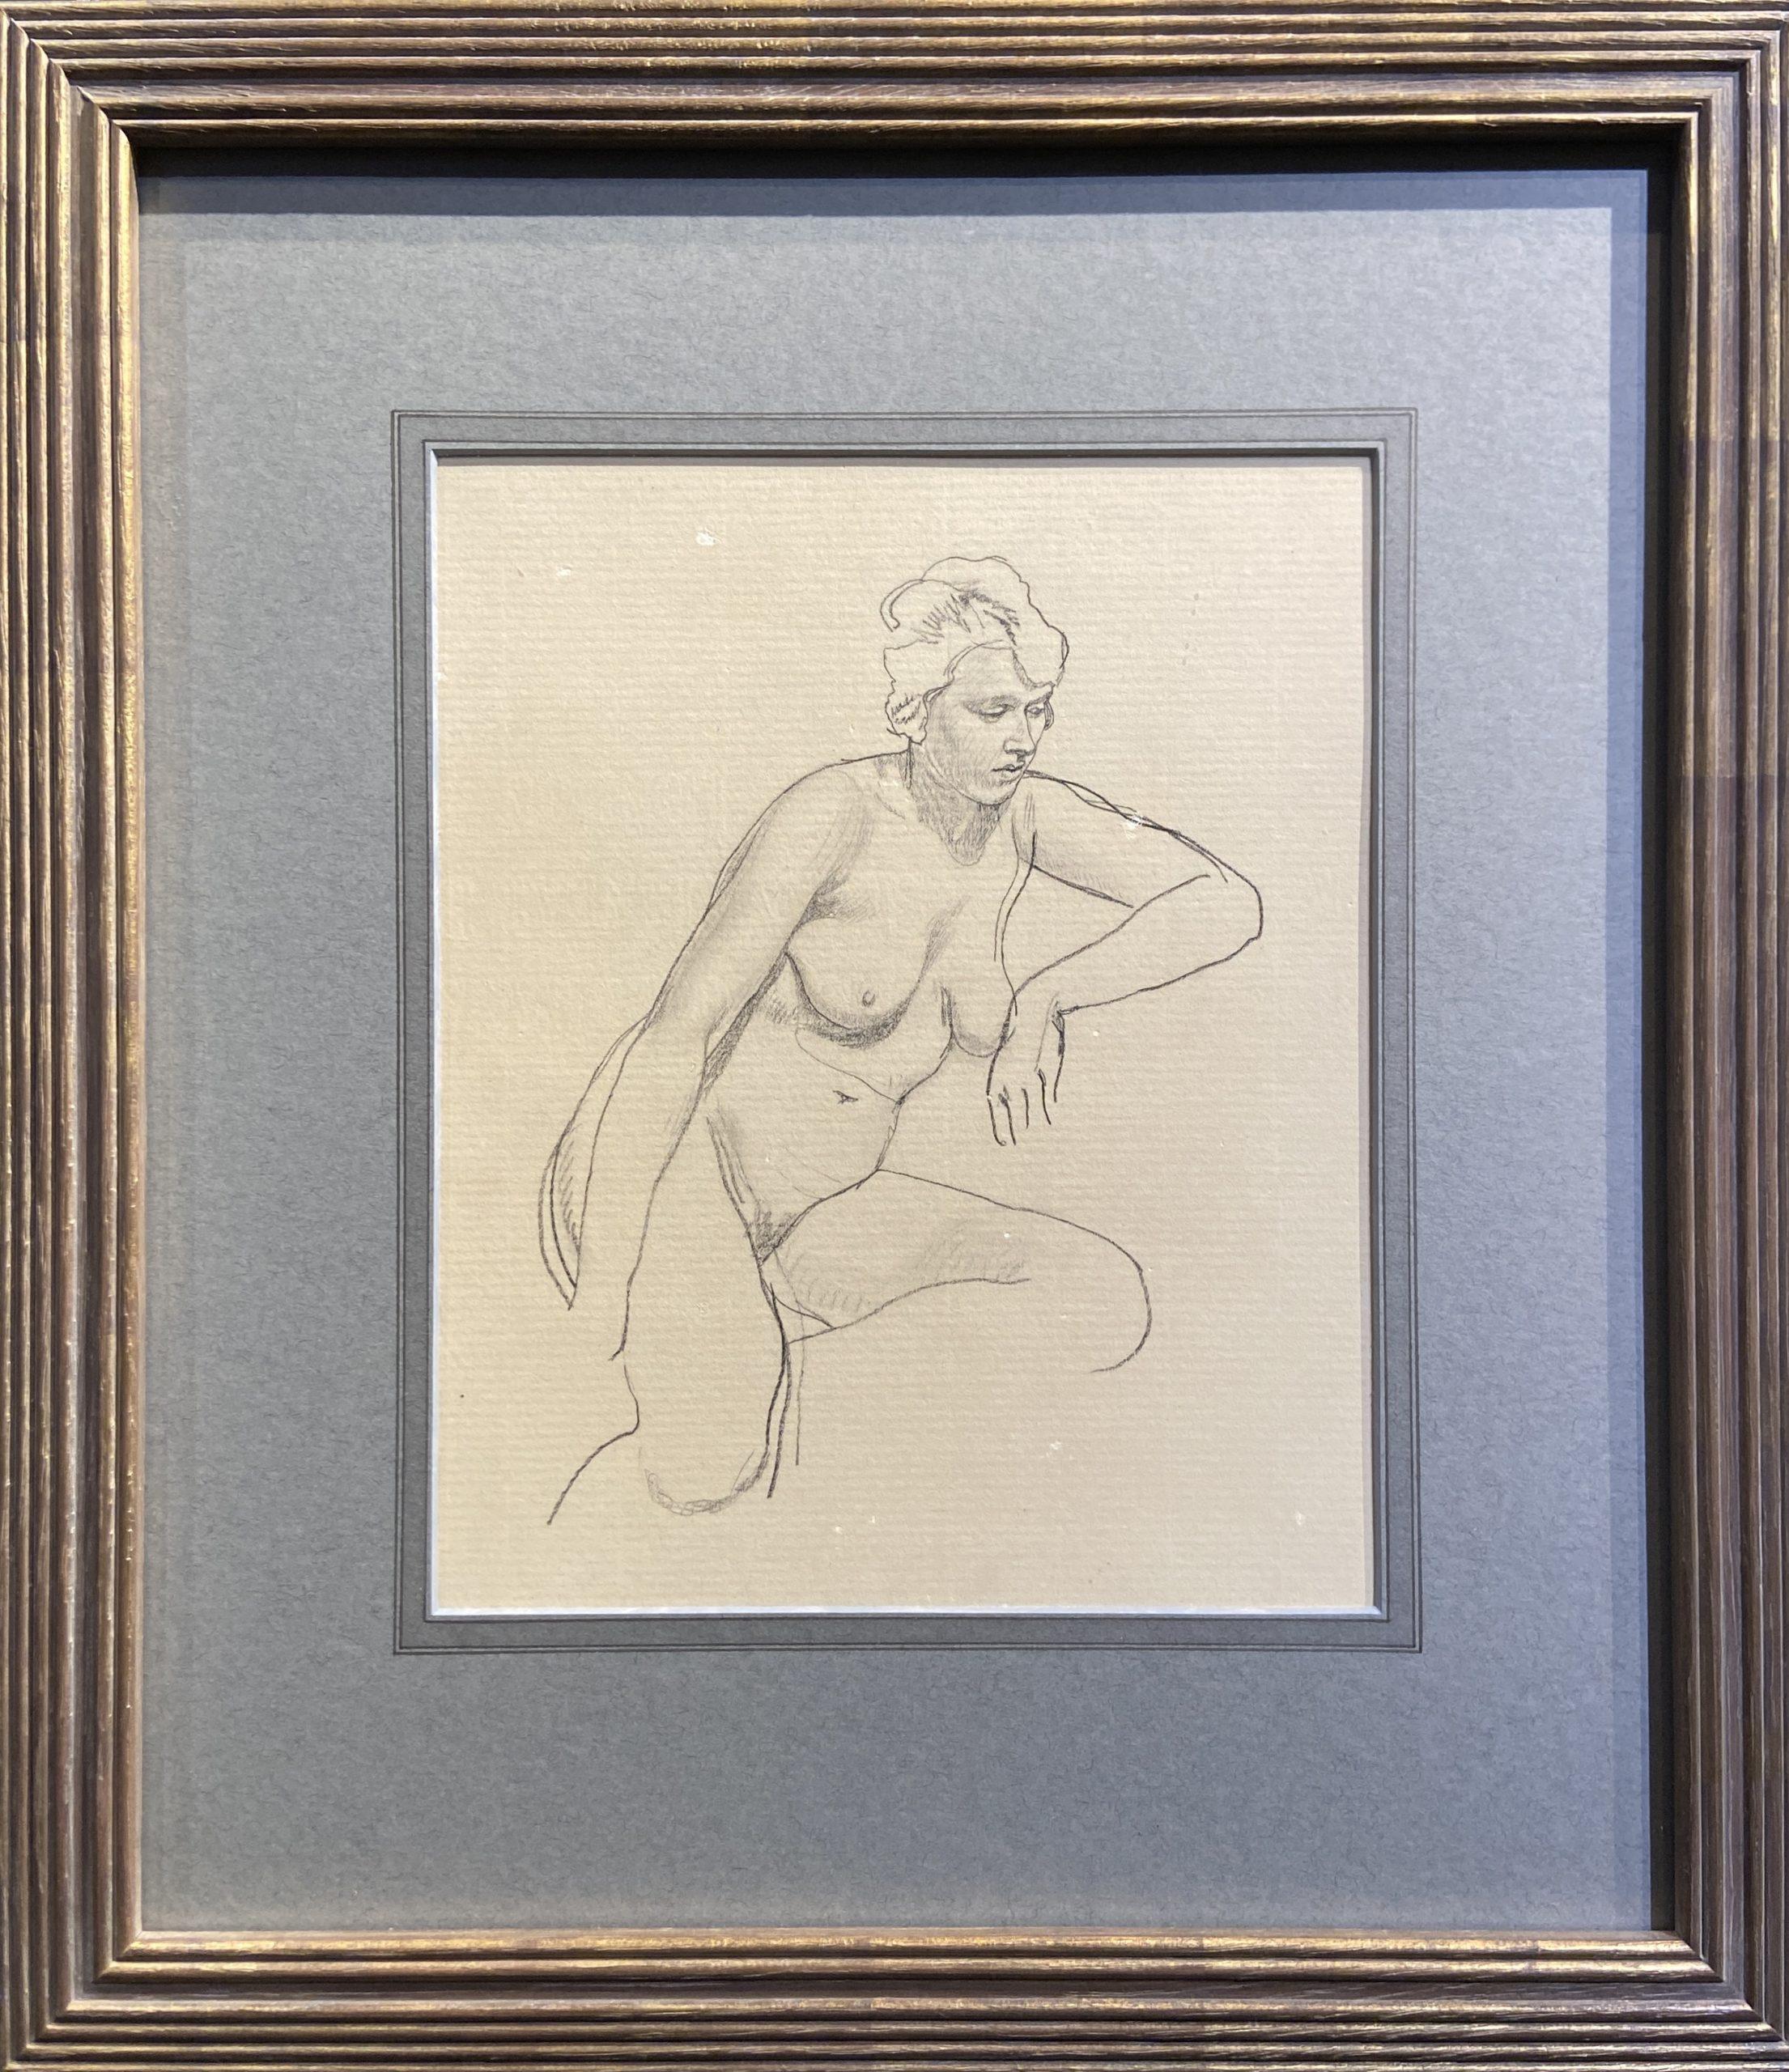 Graphite on paper
Image size: 22 x 26 inches (56 x 66 cm)
Mounted and framed


William Dring

Dring was born with the forenames Dennis William, but was known colloquially as John. He was the brother of the artist James Dring. He married the painter